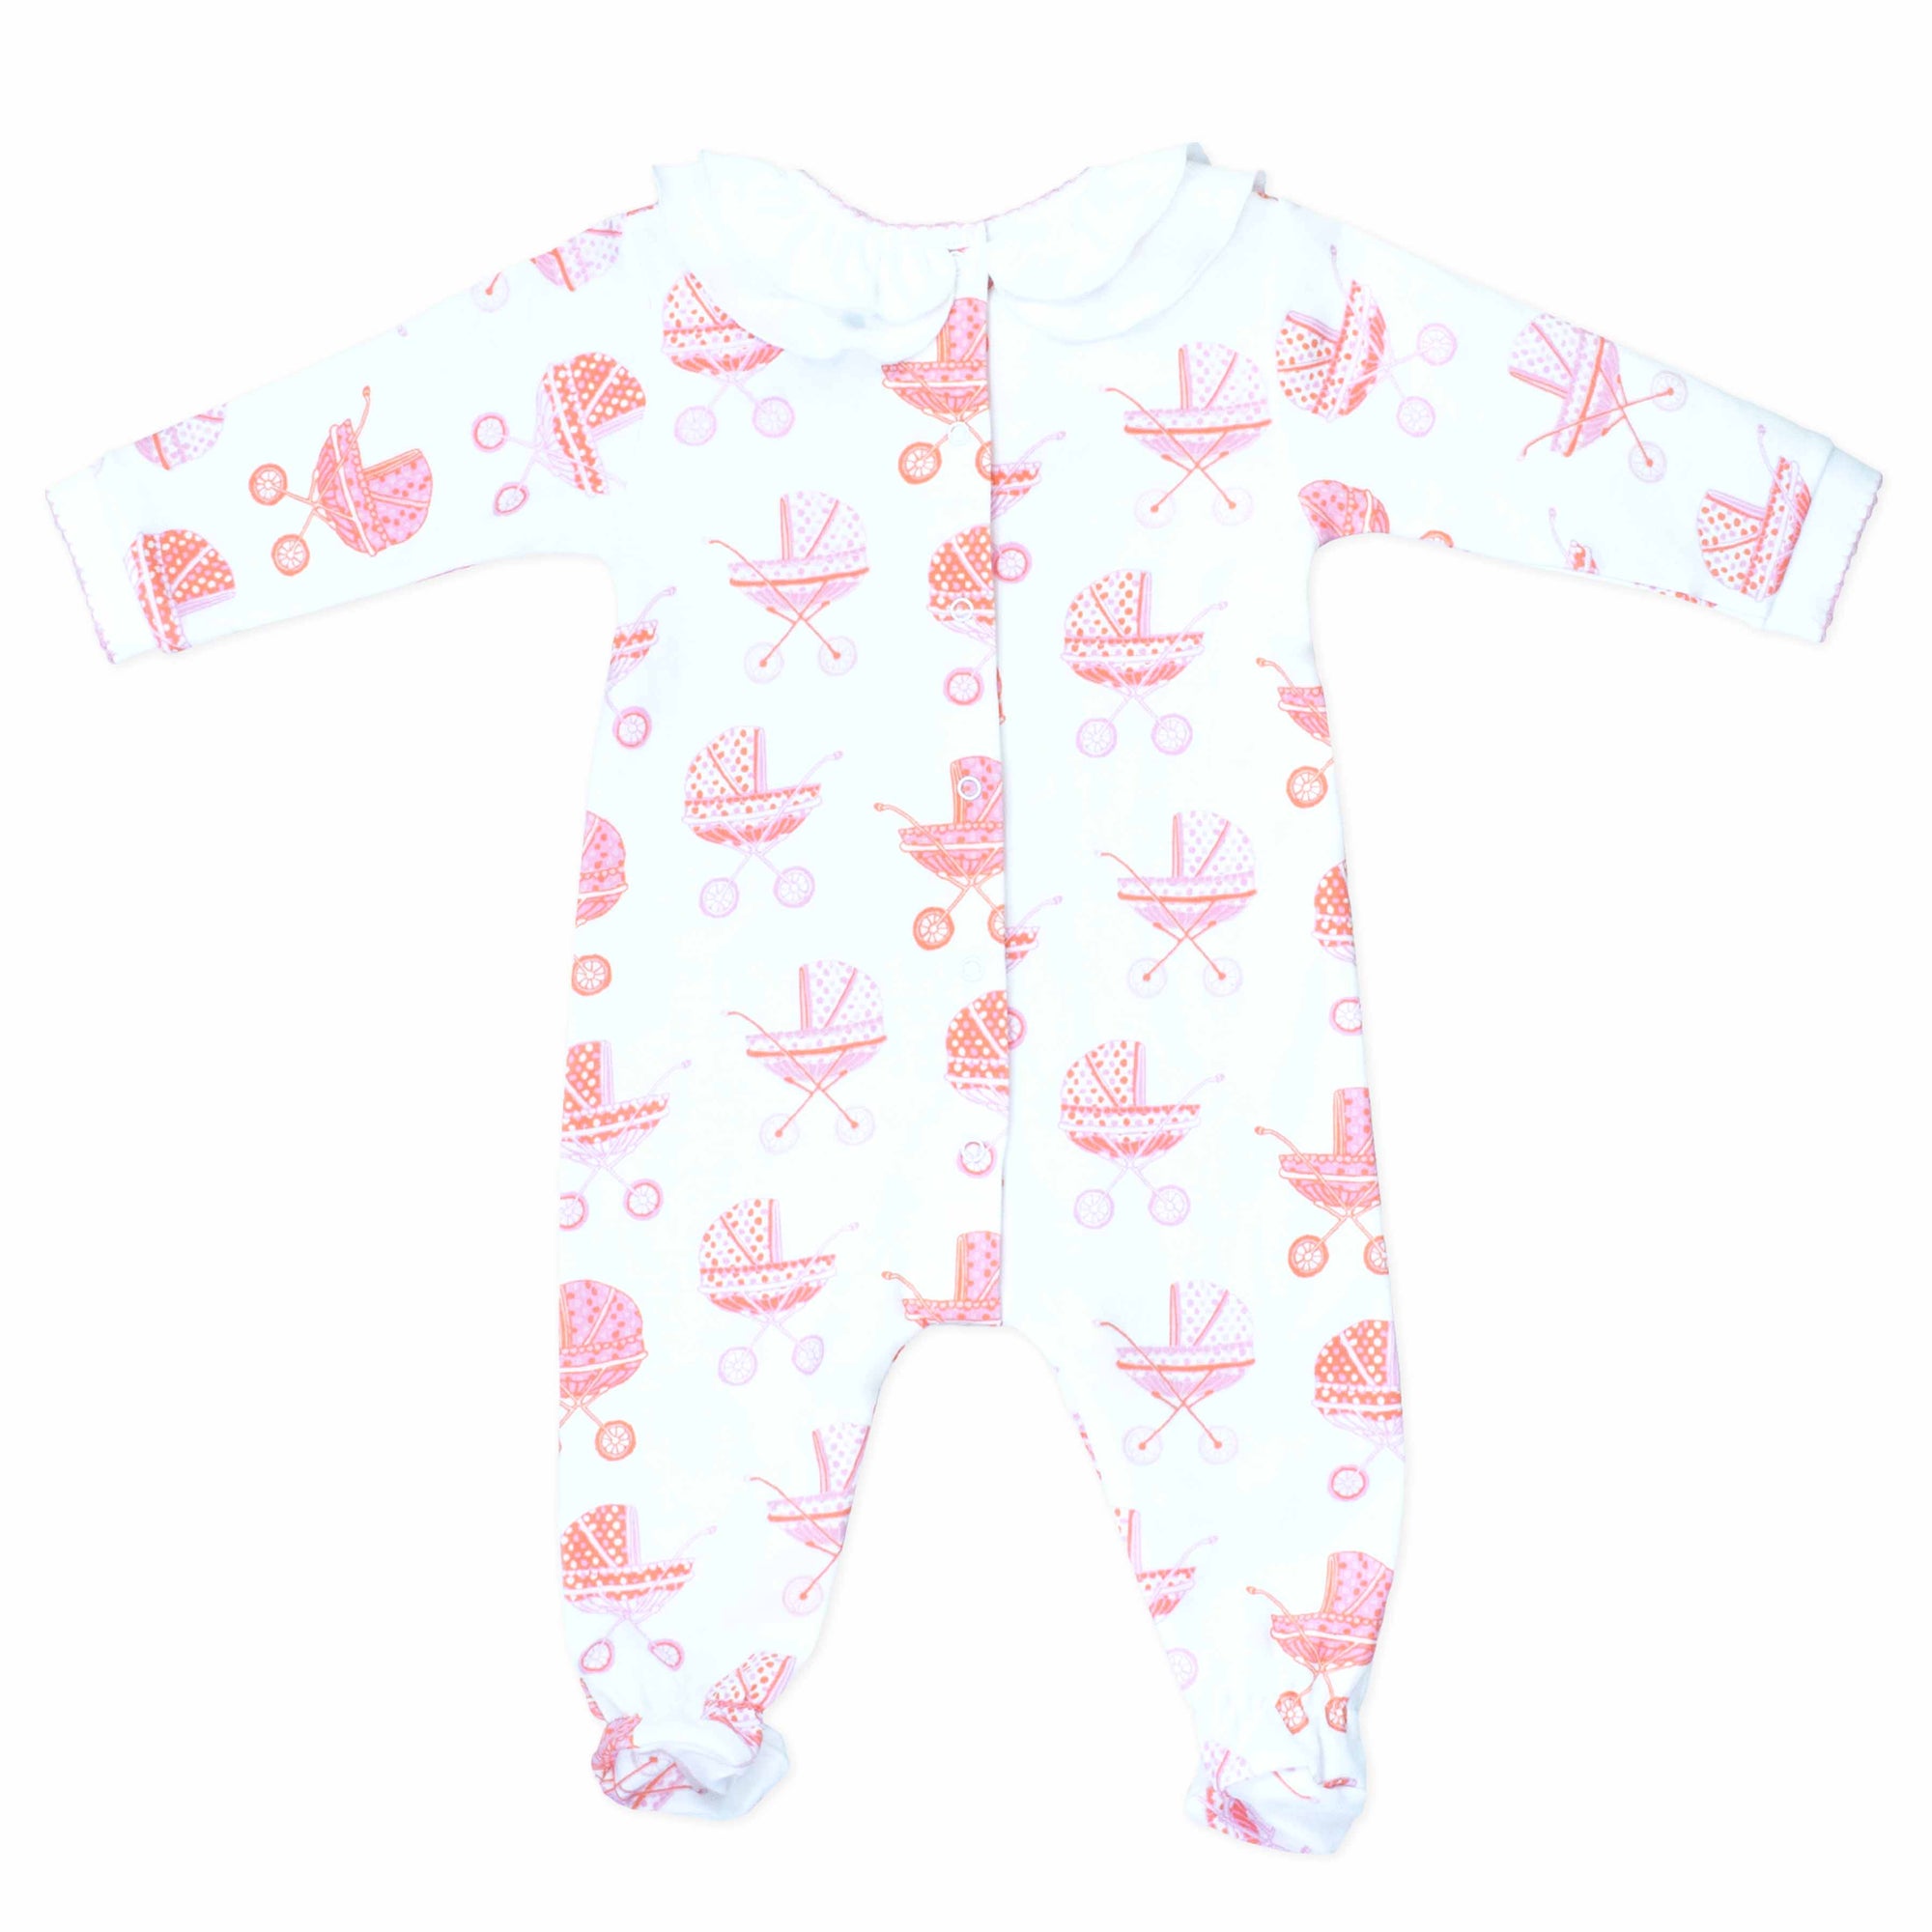 white girls playsuit with classic ruffled collar and vintage-inspired baby carriage pattern made in pima cotton - back view